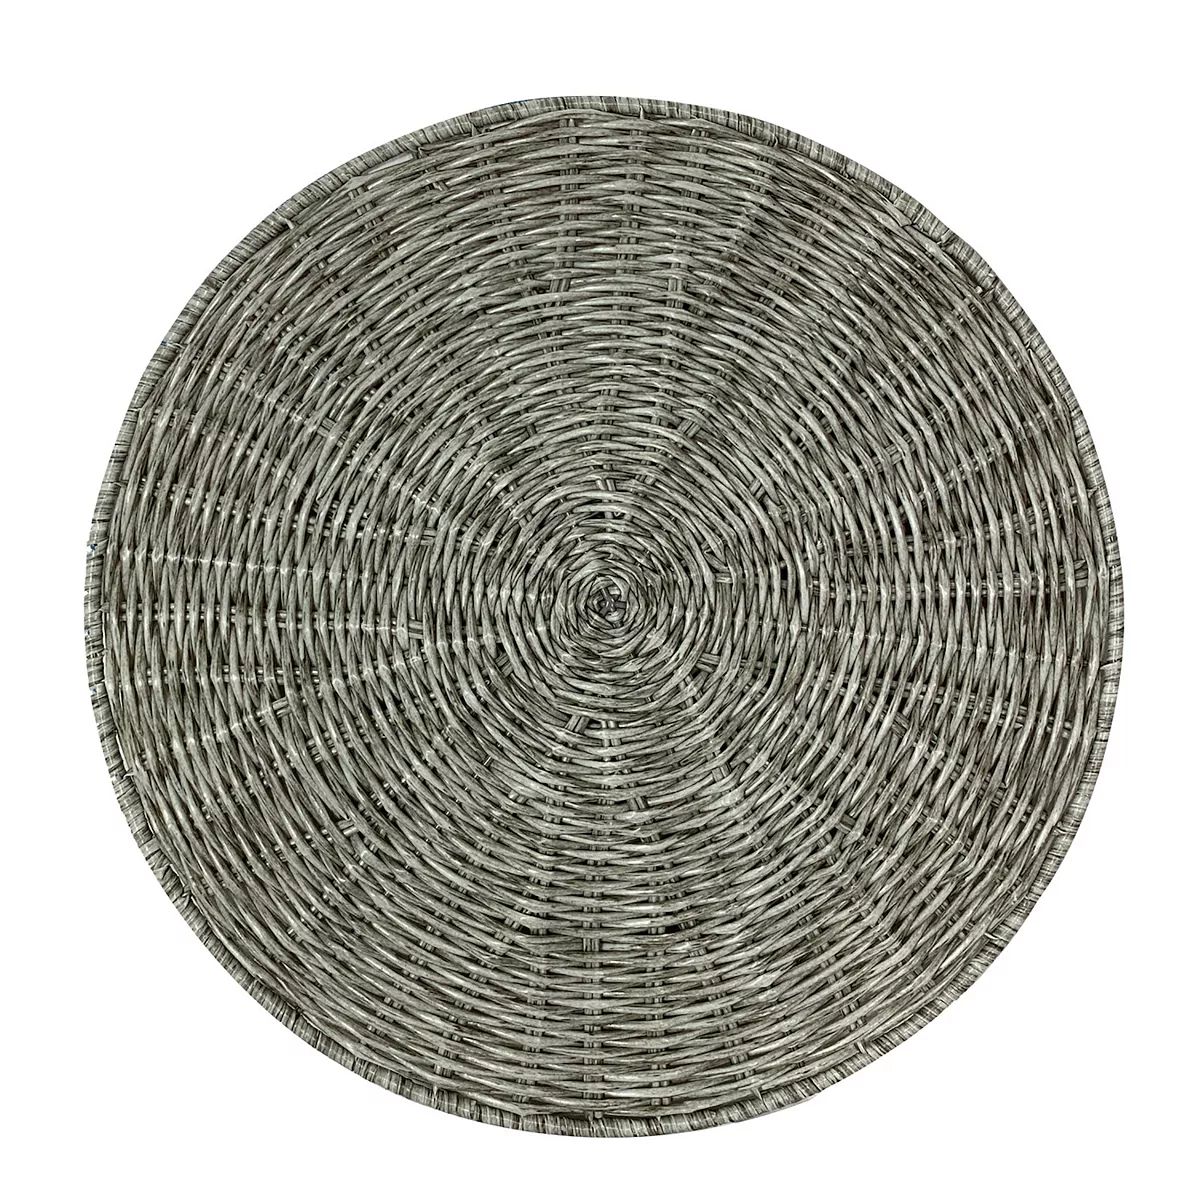 Food Network™ Resin Wicker Charger Plate | Kohl's